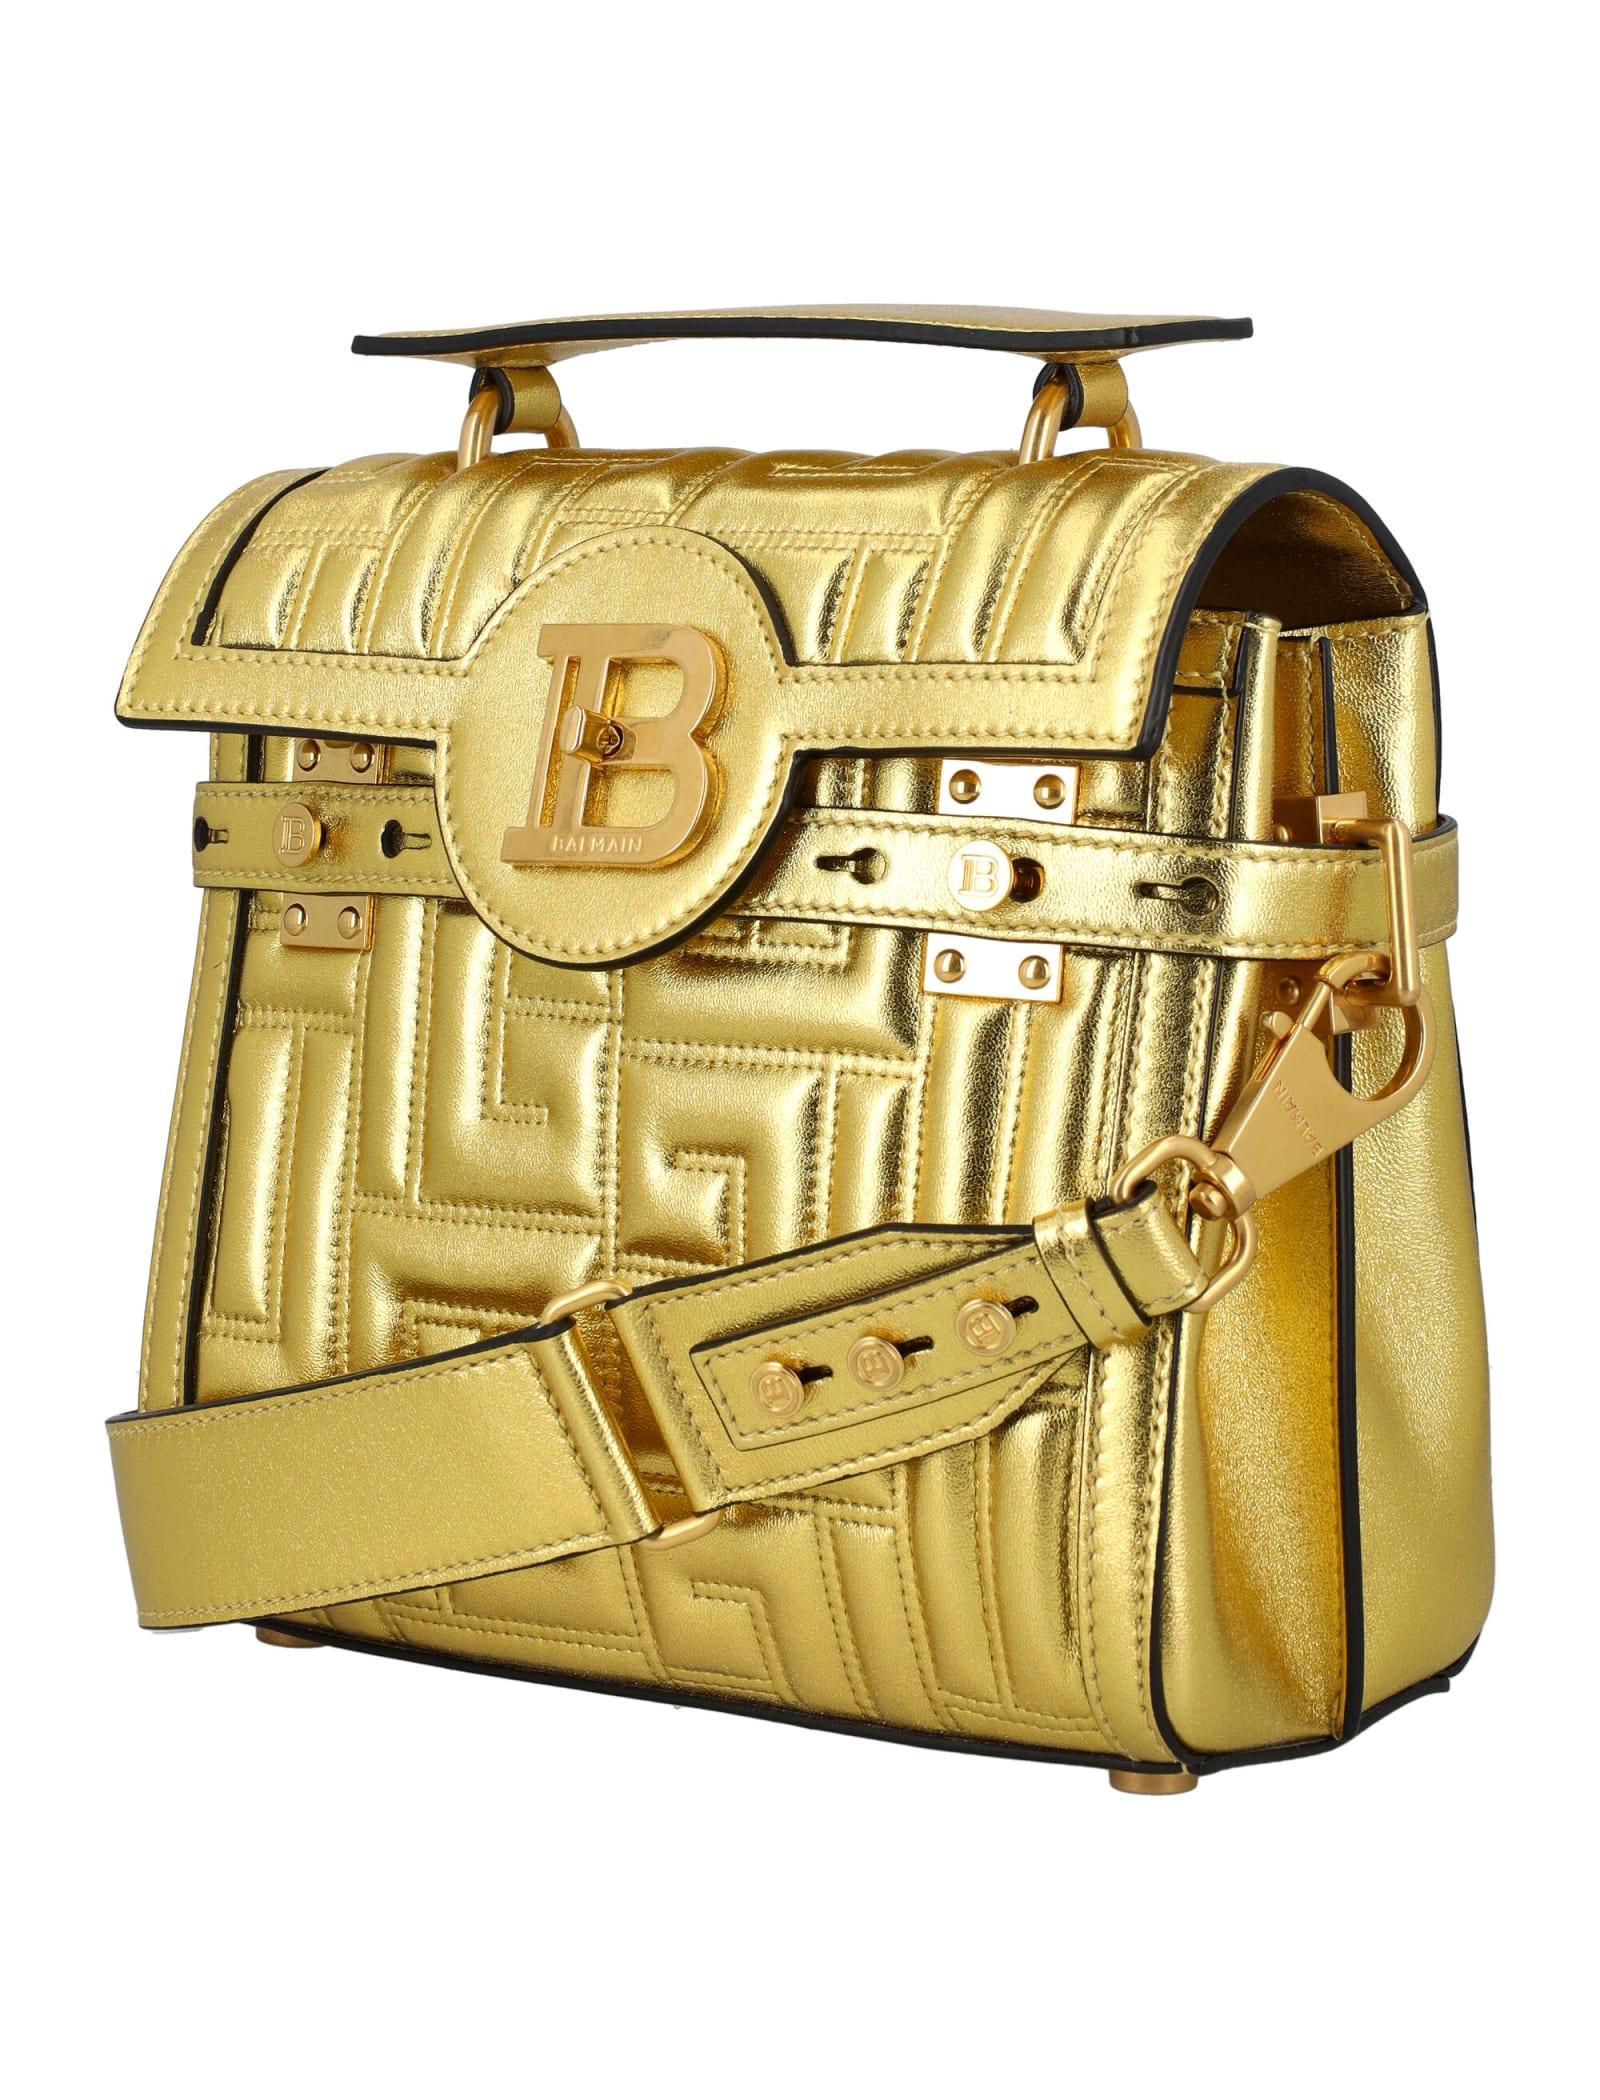 Balmain Quilted Leather B-buzz 23 Bag in Gold (Metallic) | Lyst